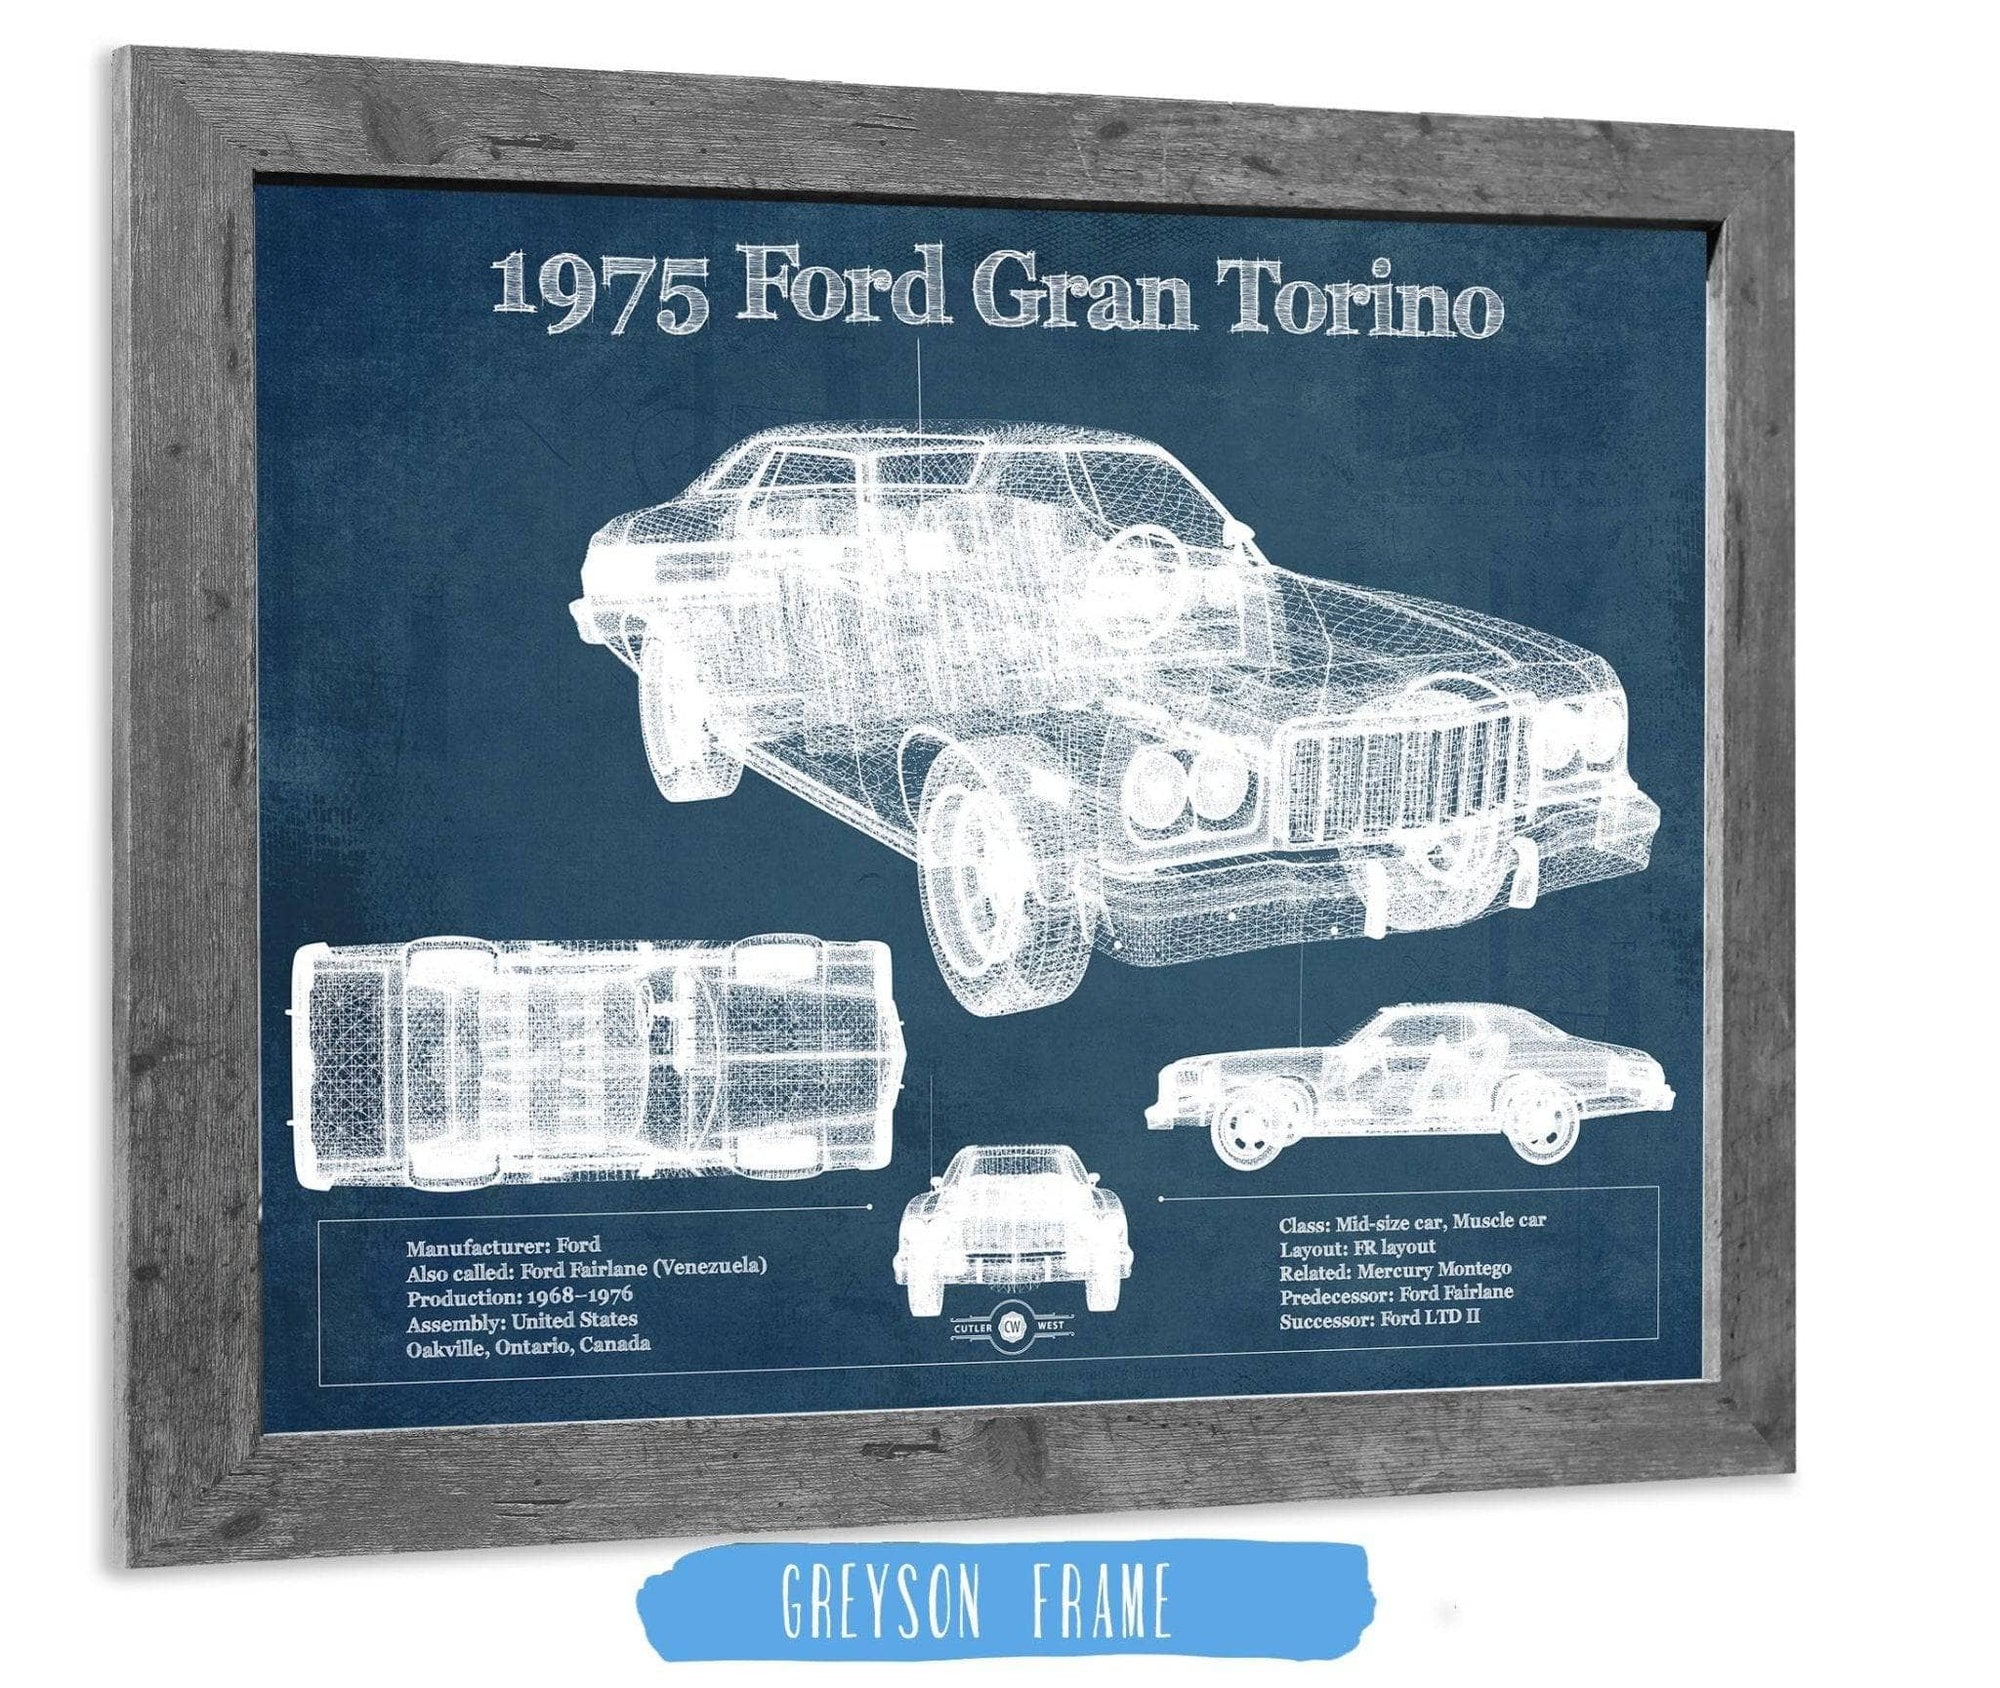 Cutler West Ford Collection 14" x 11" / Greyson Frame Ford Gran Torino 1975 Blueprint Vintage Auto Print 933350038_41550